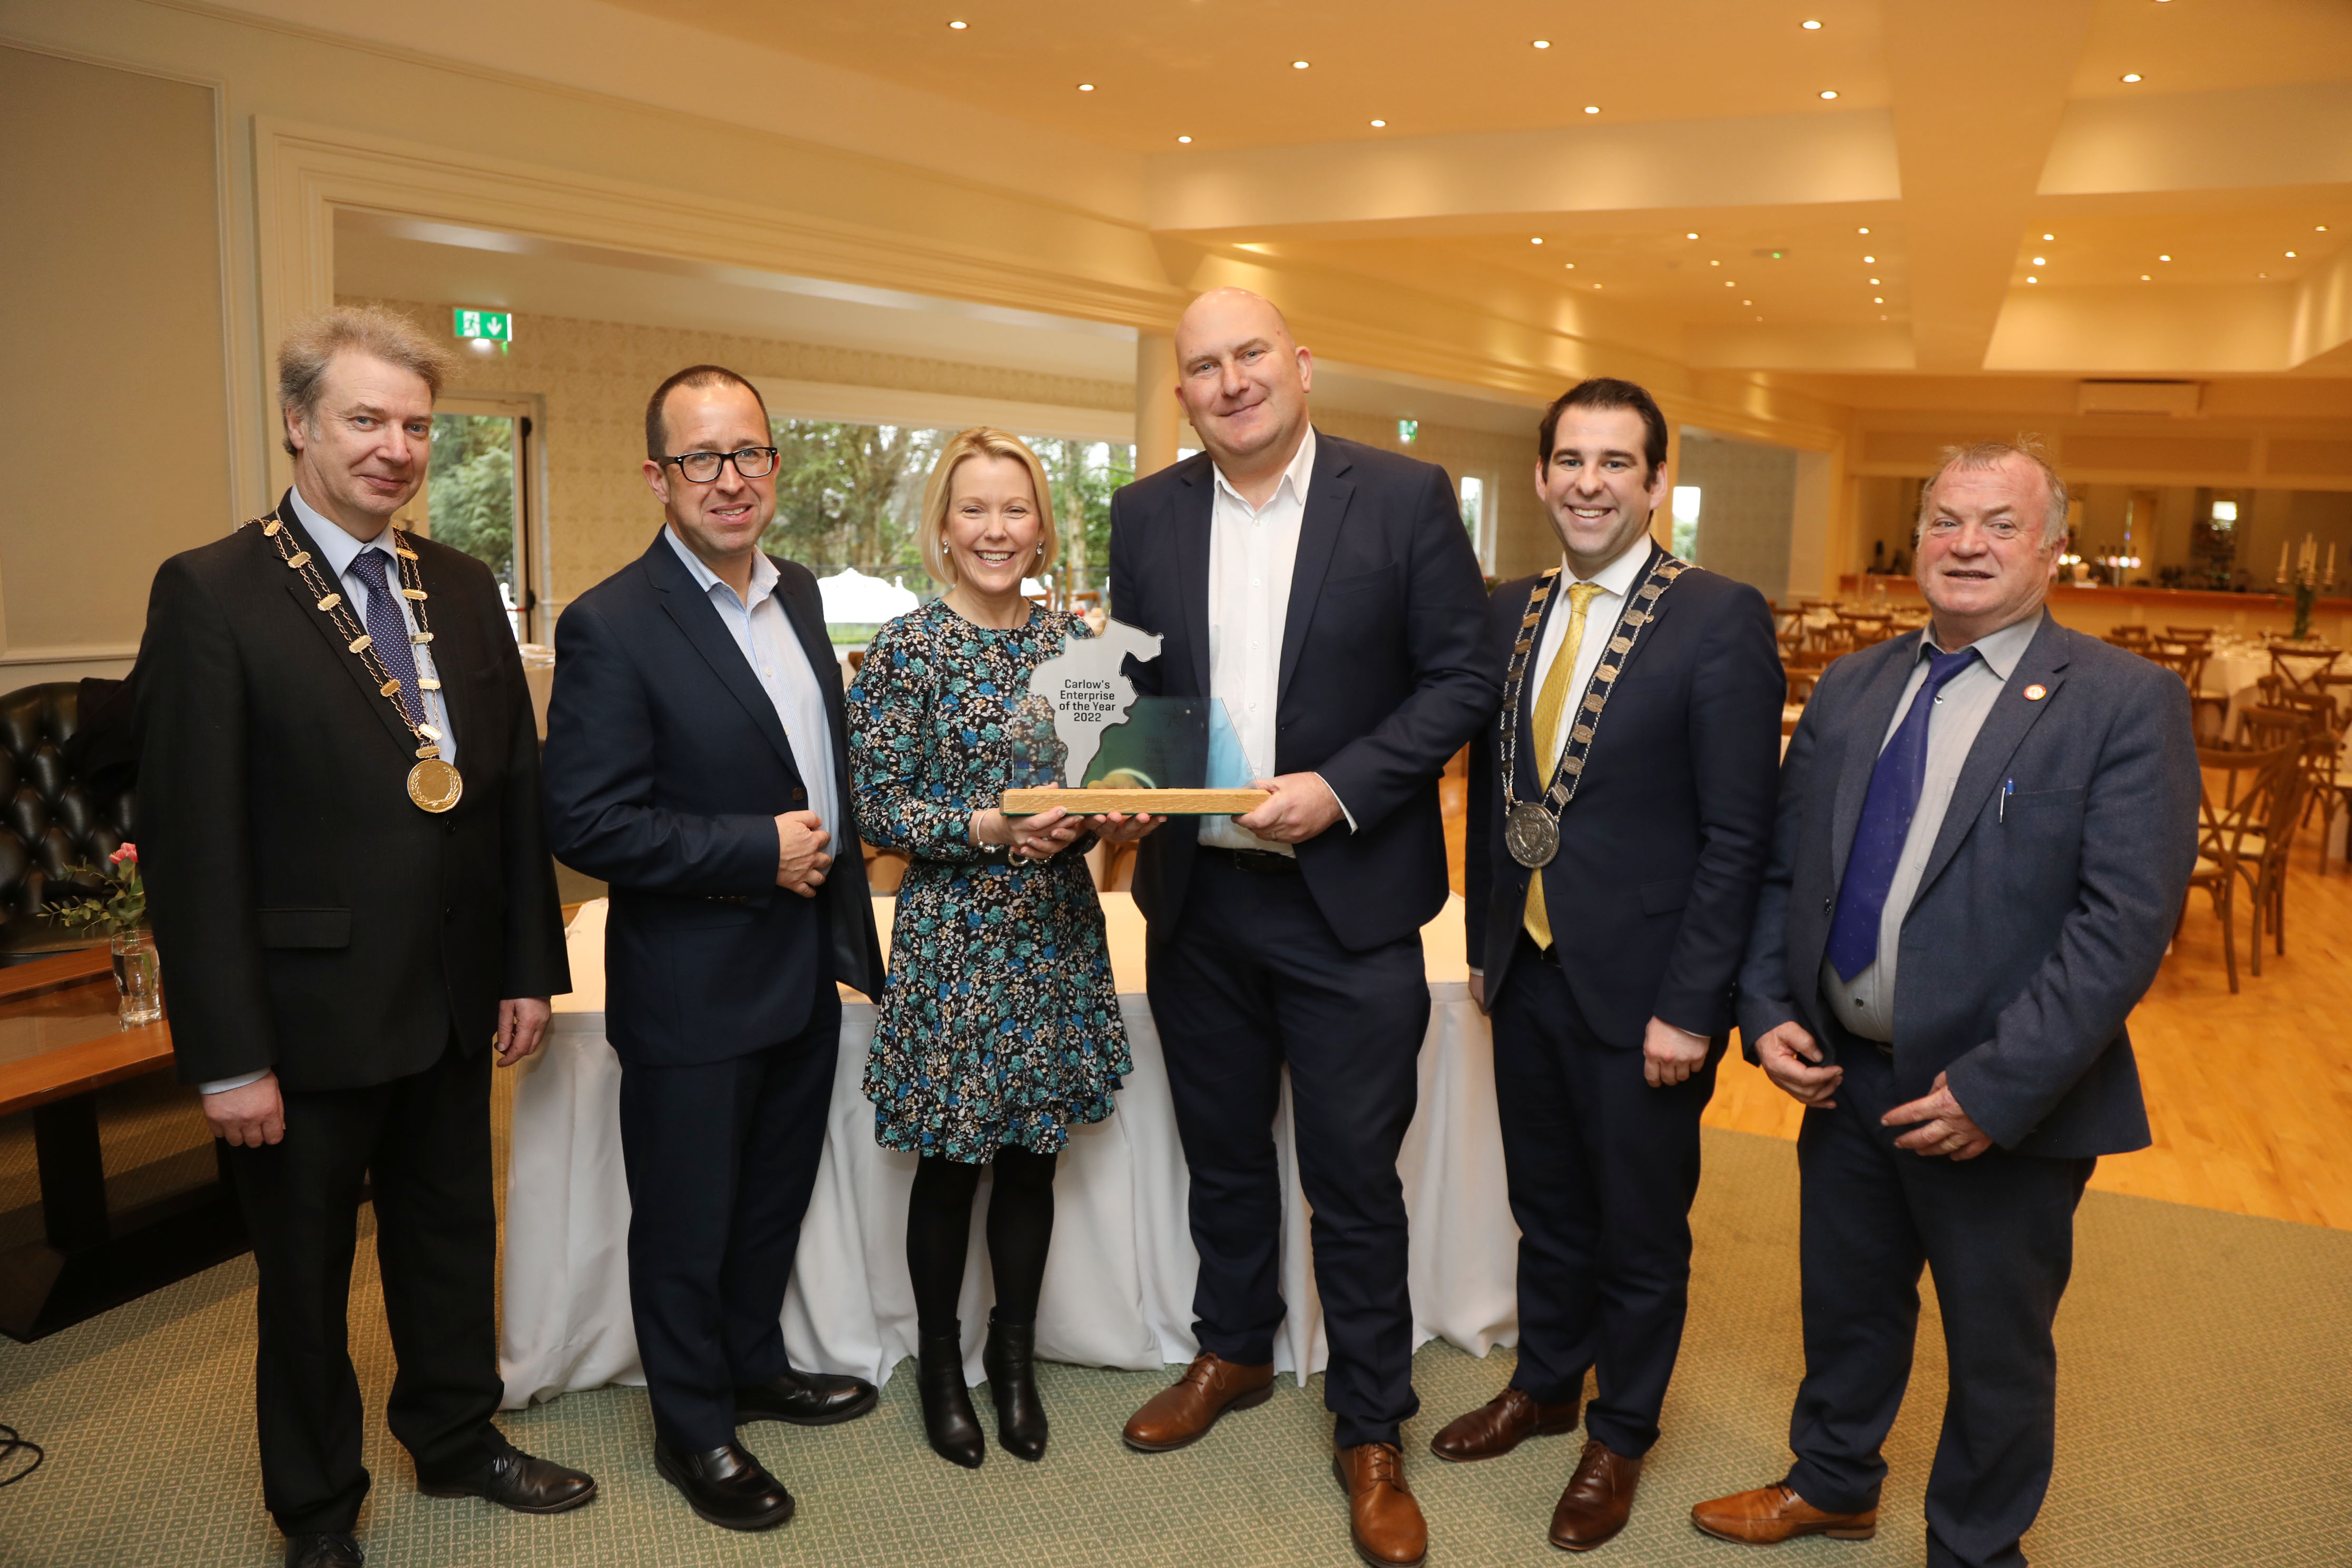  CARLOW ENTERPRISE AWARDS CEREMONY HELD Feedalpha to Represent Carlow at National Enterprise Awards